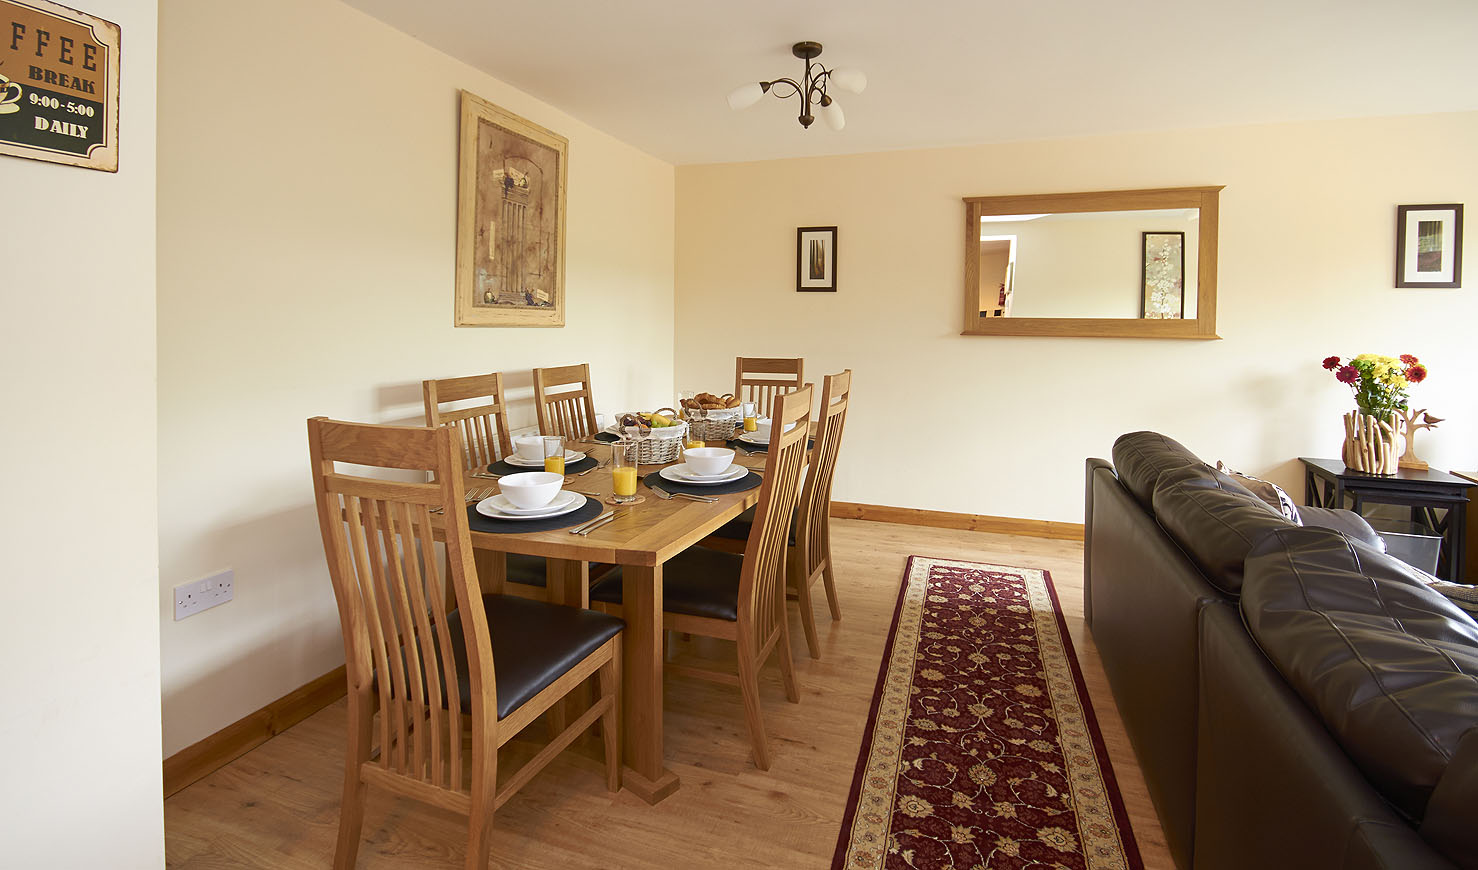 New Forest self catering cottages | Shepherds Spring Cottages dining area